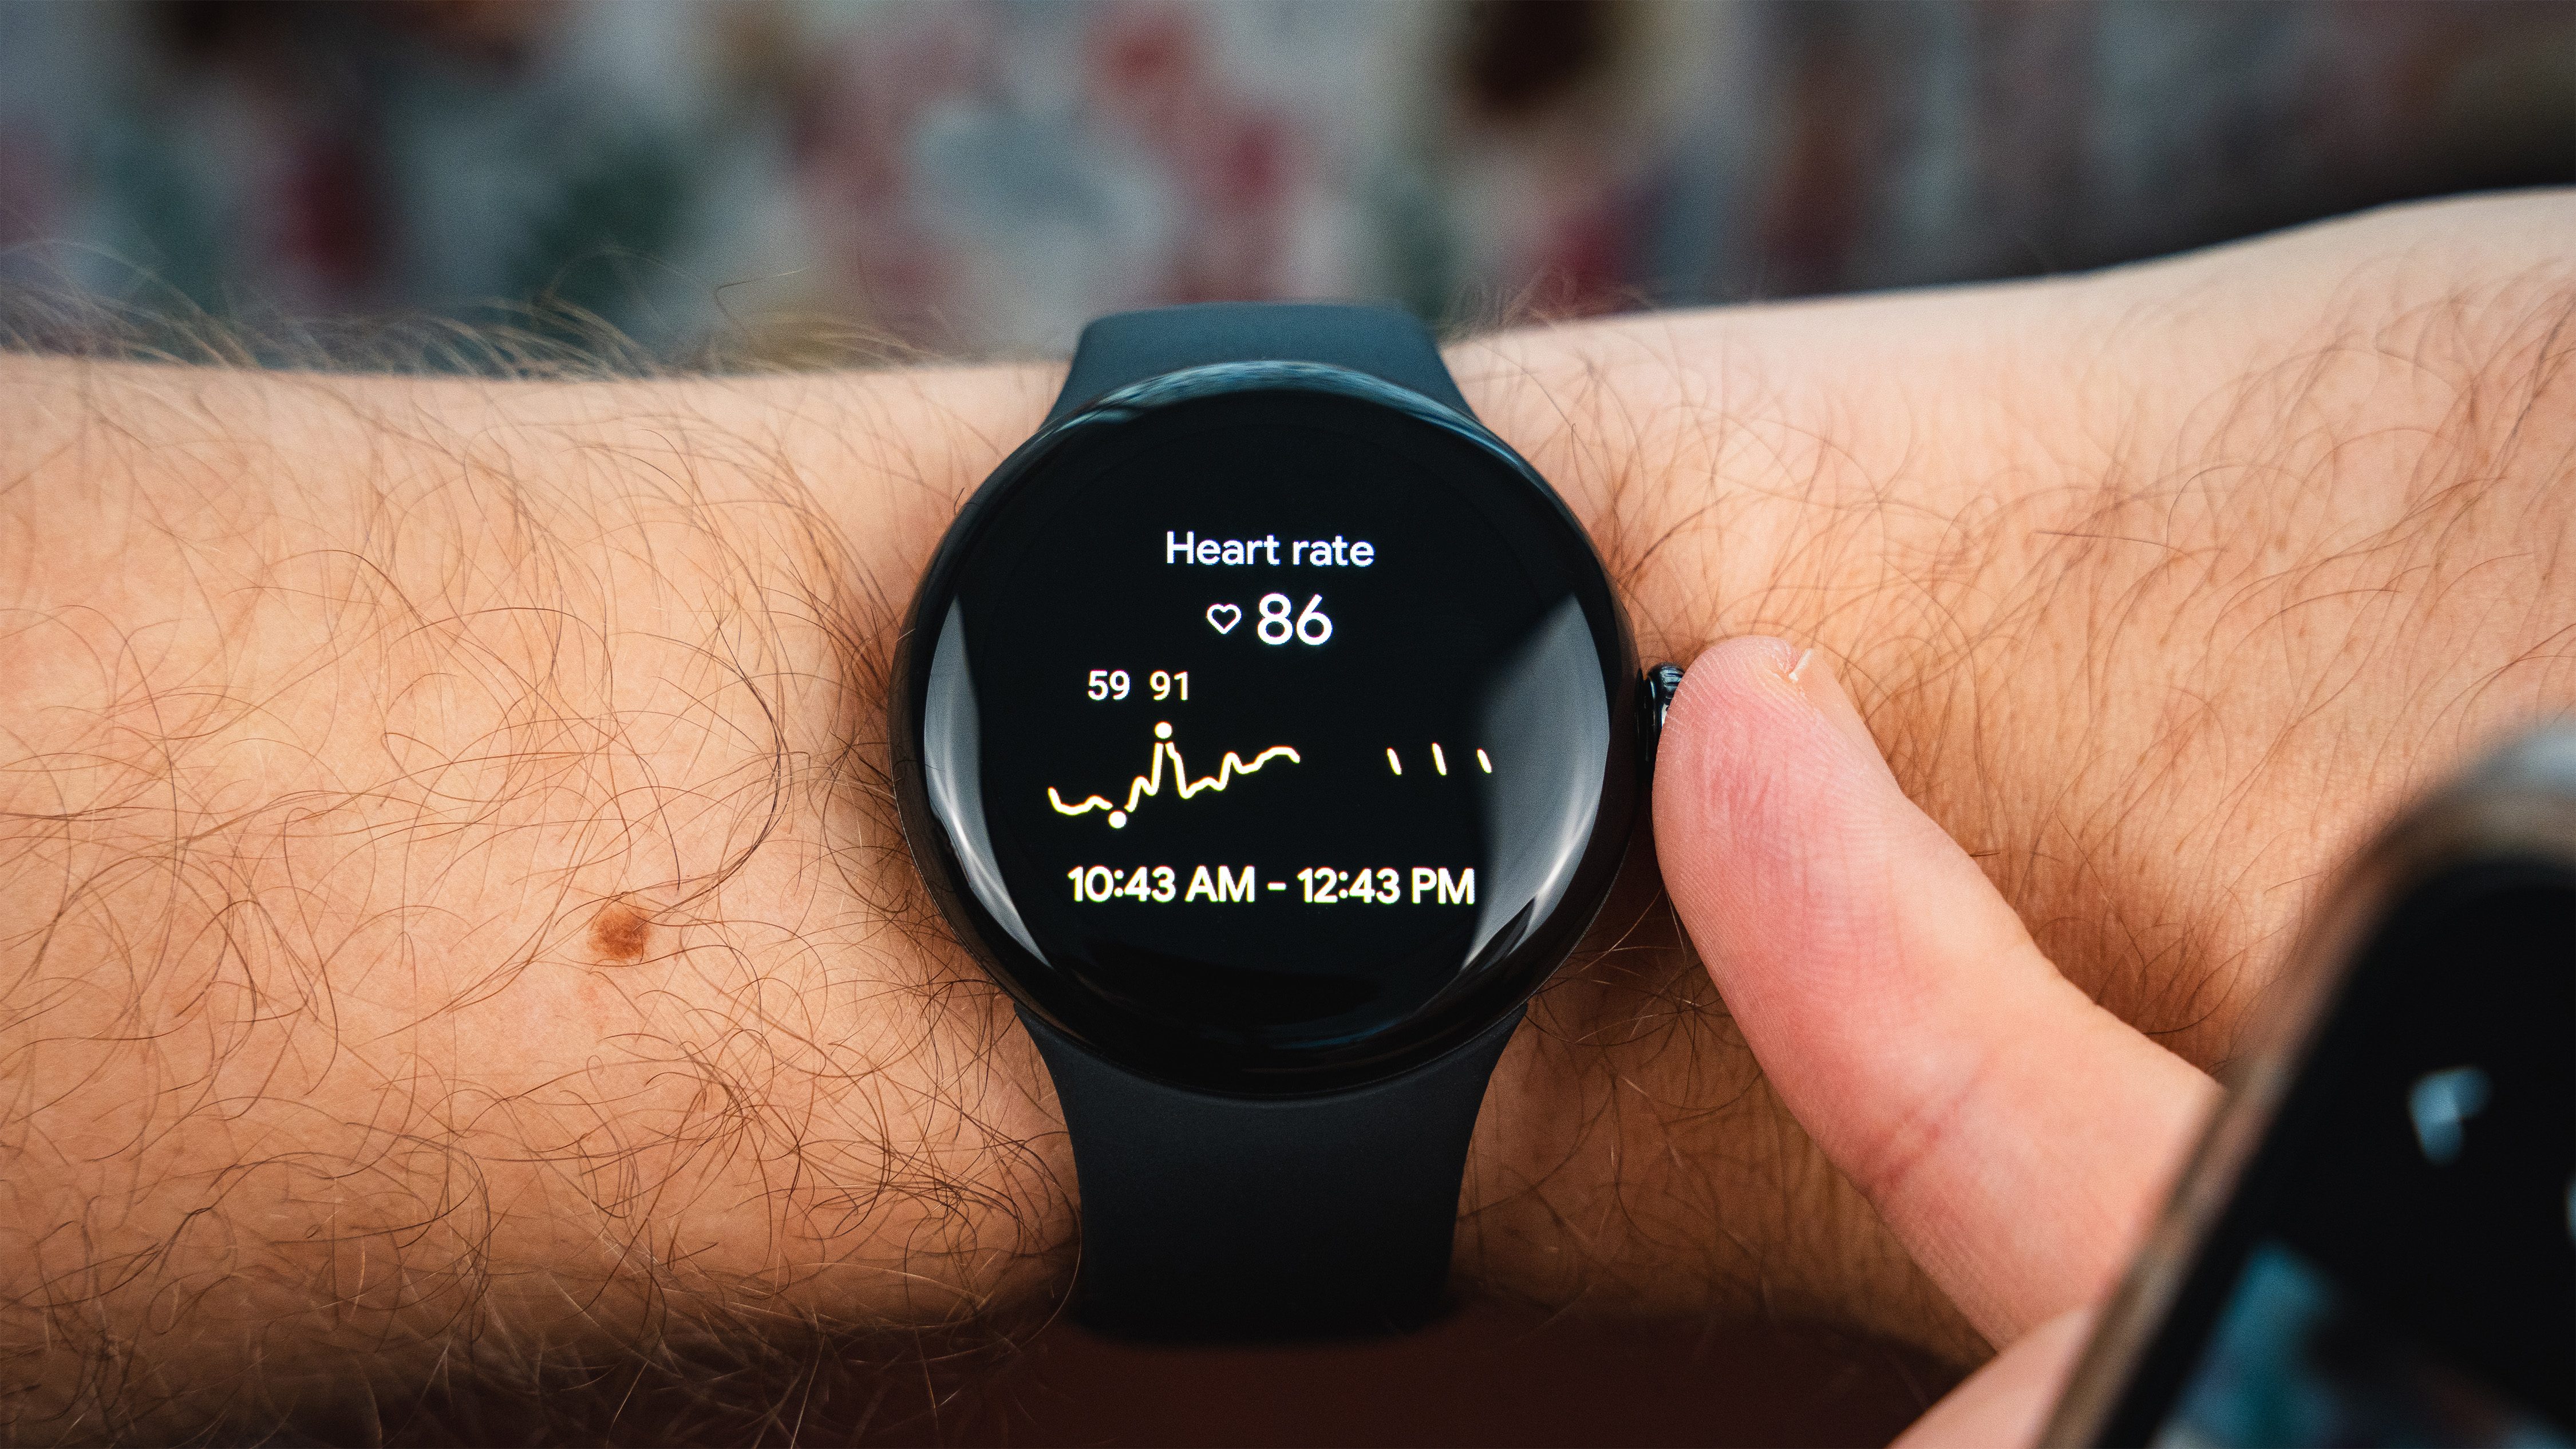 I ran with the Apple Watch 9 and Google Pixel Watch 2 — and the